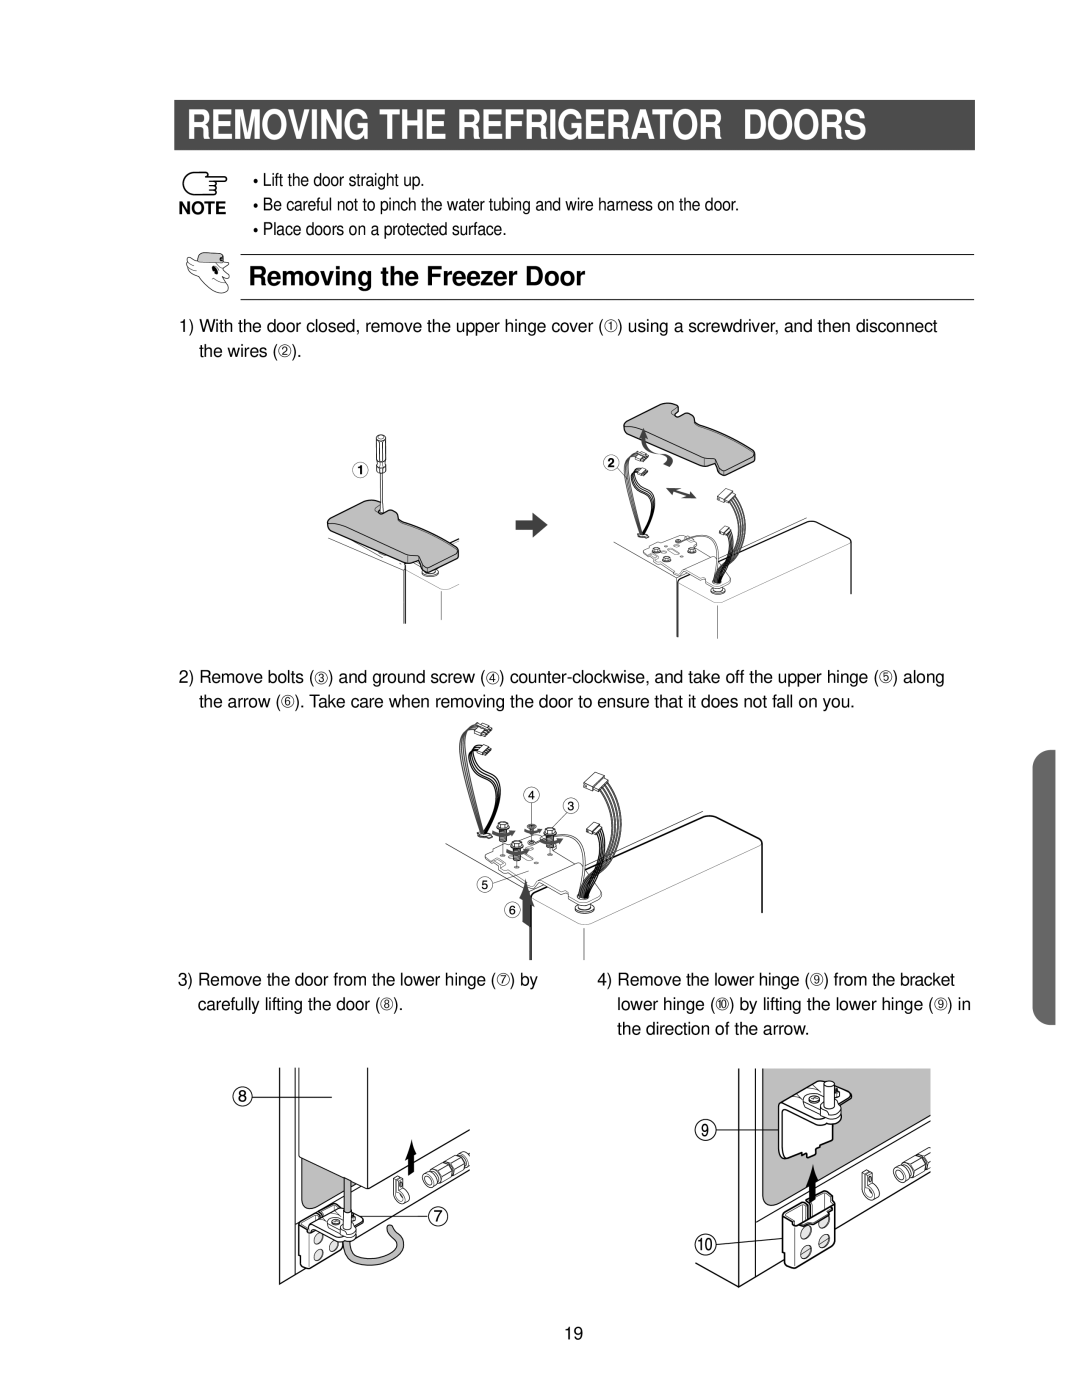 Samsung RS2533SW owner manual Removing the Freezer Door, Removing The Refrigerator Doors 